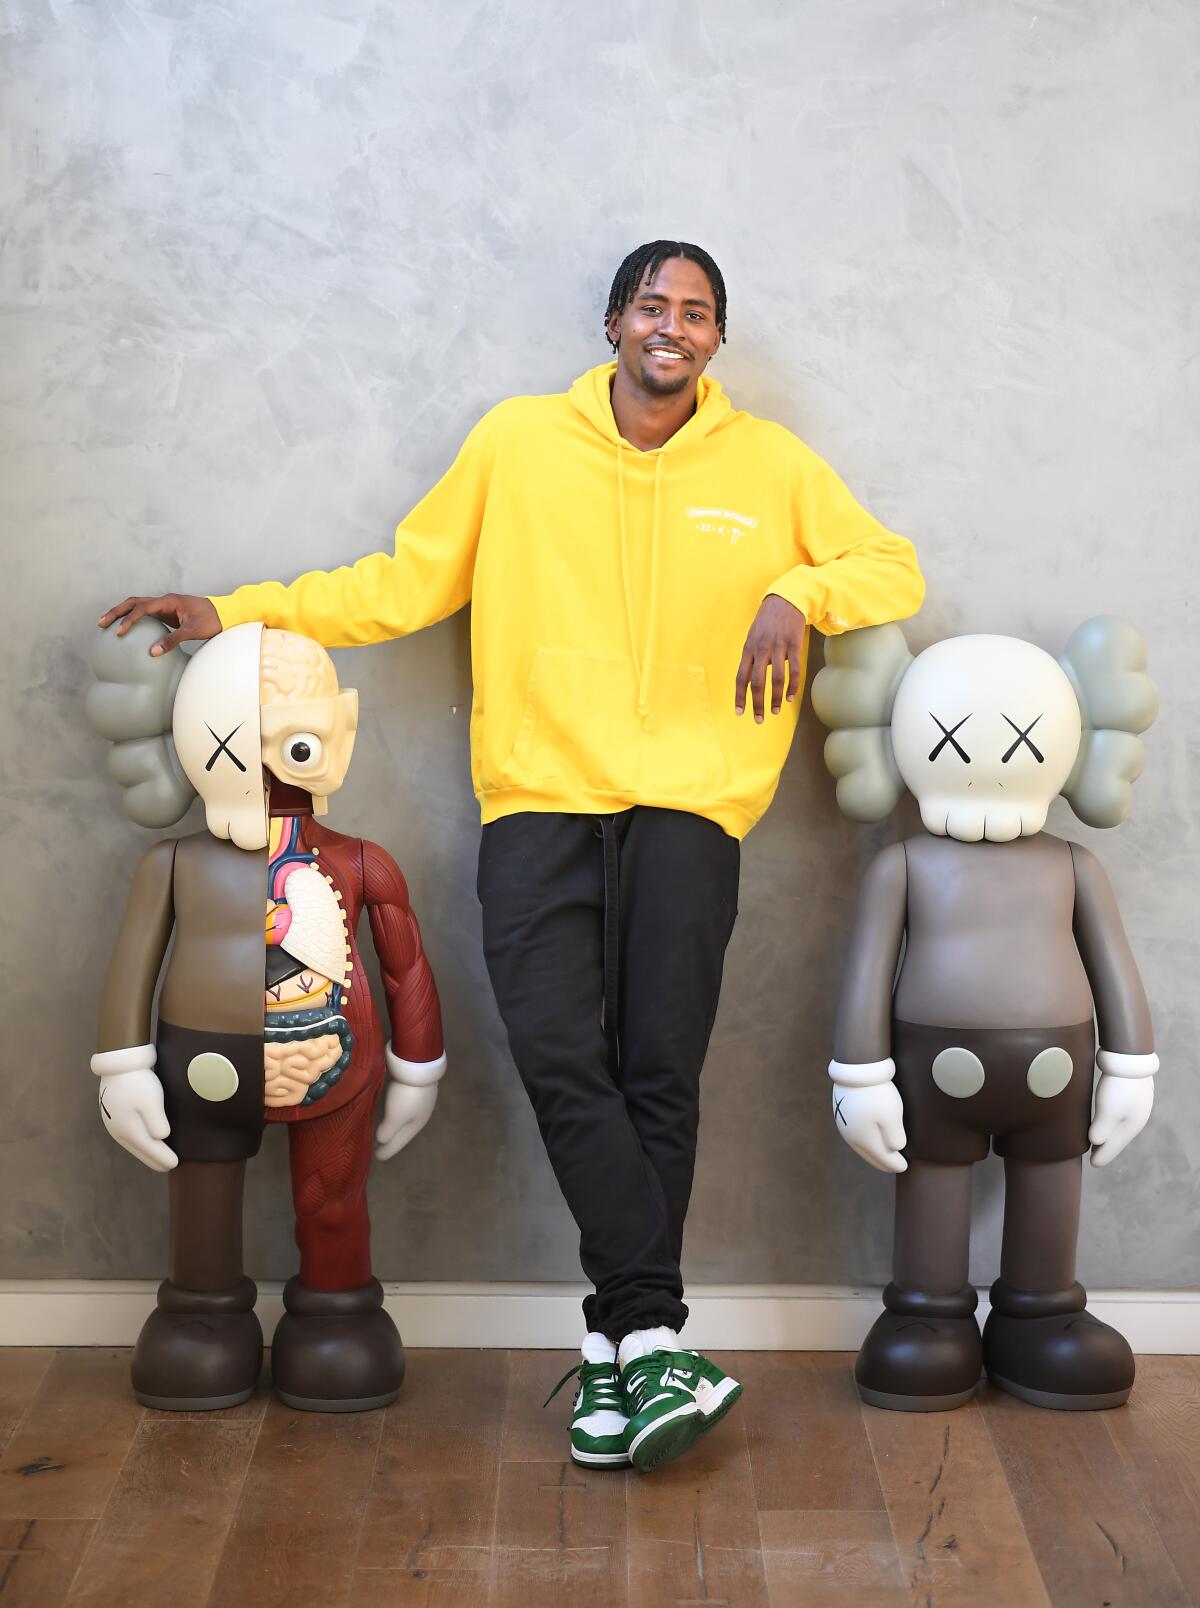 Maurice Harkless poses next to to a pair of KAWS figures at his home in Venice.